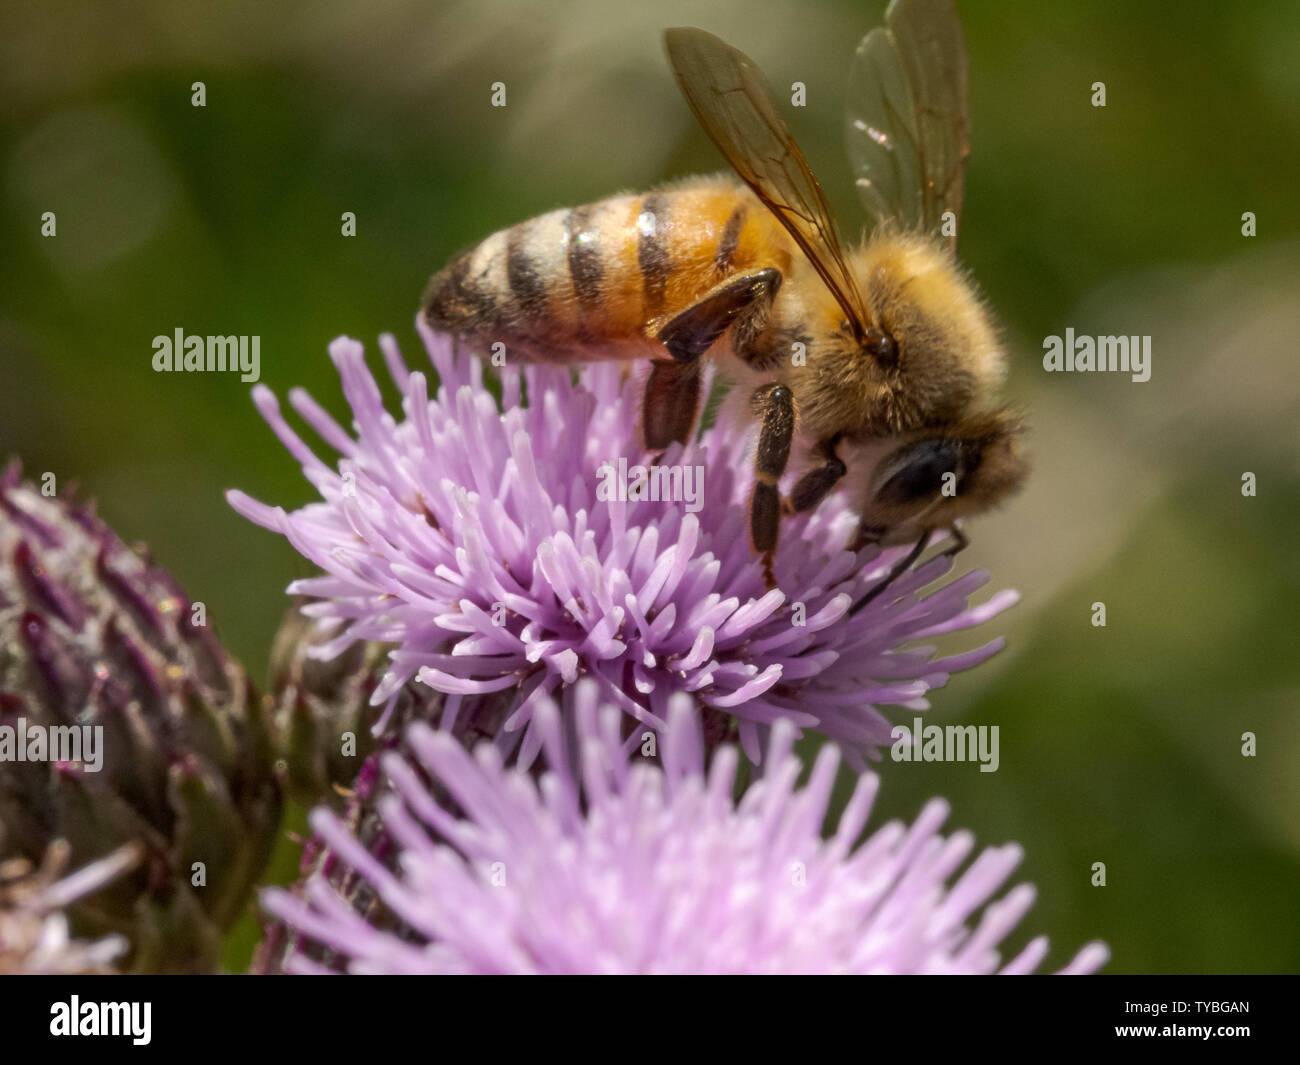 A Honeybee pollinating a Thistle on Blackheath in the Royal Borough of Greenwich, London, UK Stock Photo